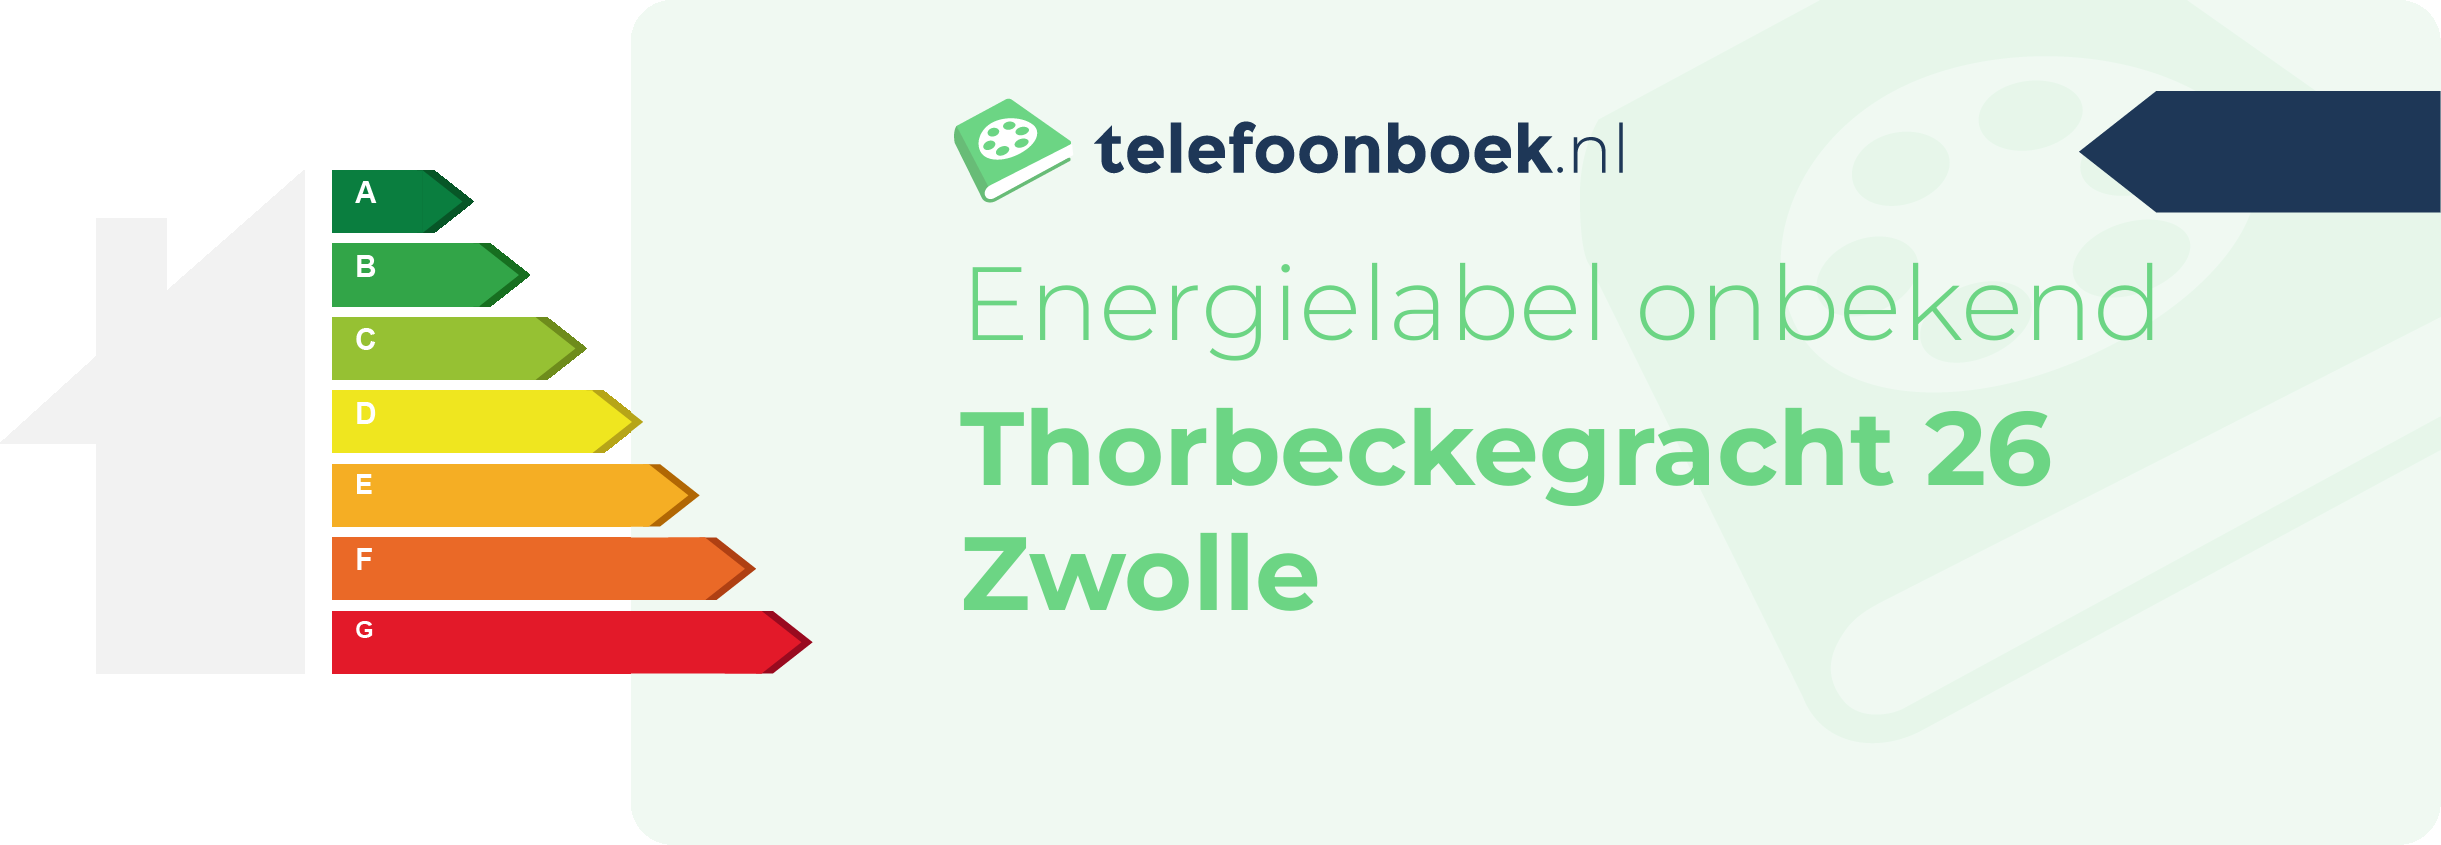 Energielabel Thorbeckegracht 26 Zwolle